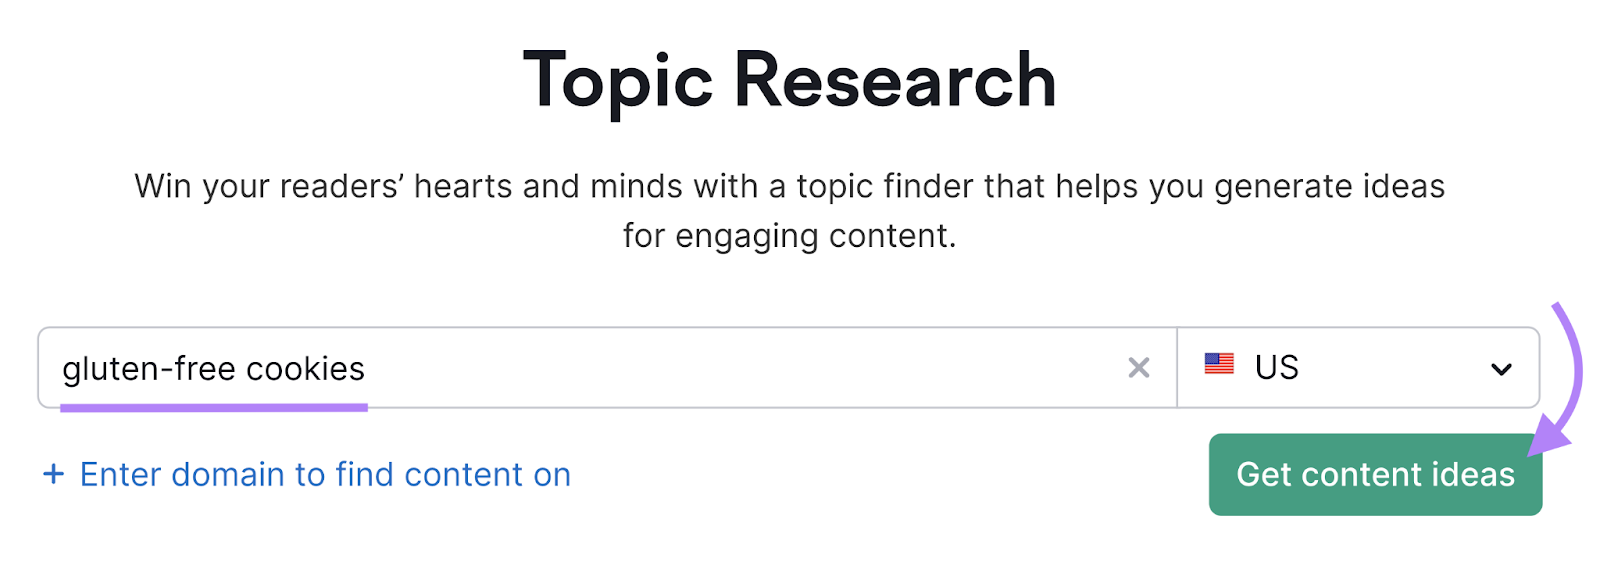 "gluten-free cookies" entered into the Topic Research tool search bar